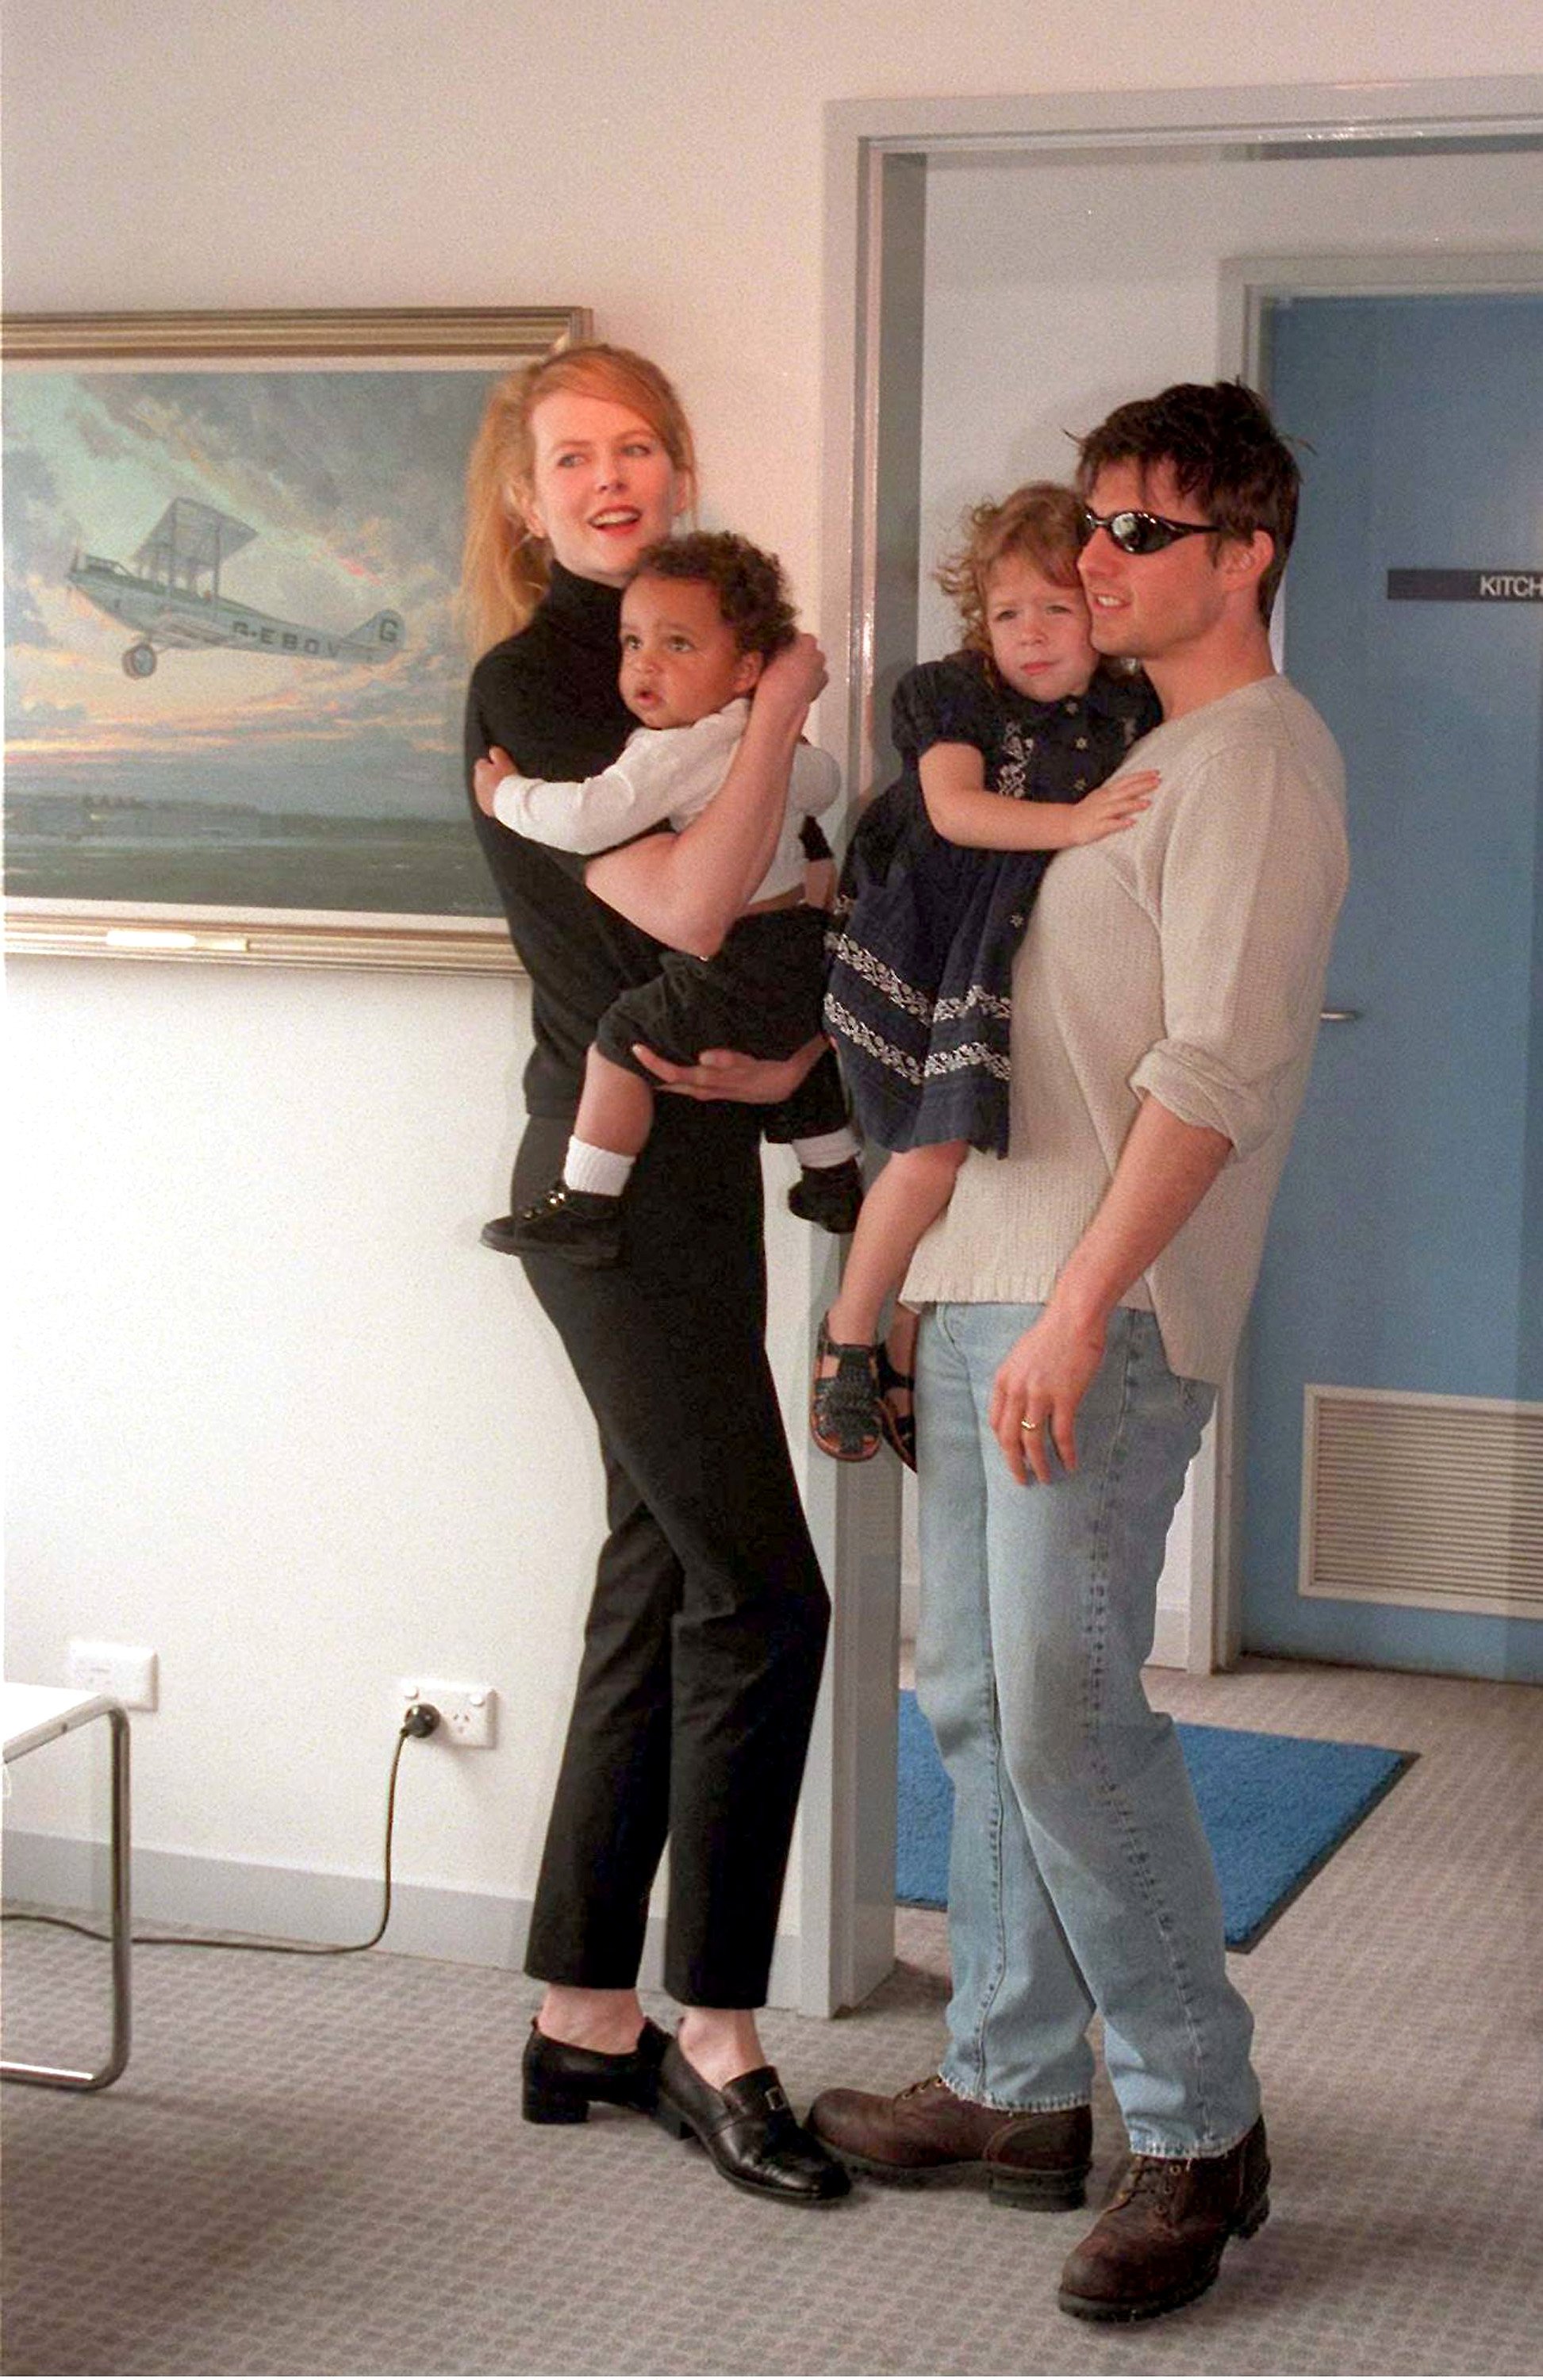 Nicole Kidman, Tom Cruise, Connor Cruise, and Isabella Cruise at Sydney Kingsford Smith airport on January 24, 1996 in Sydney, Australia | Source: Getty Images